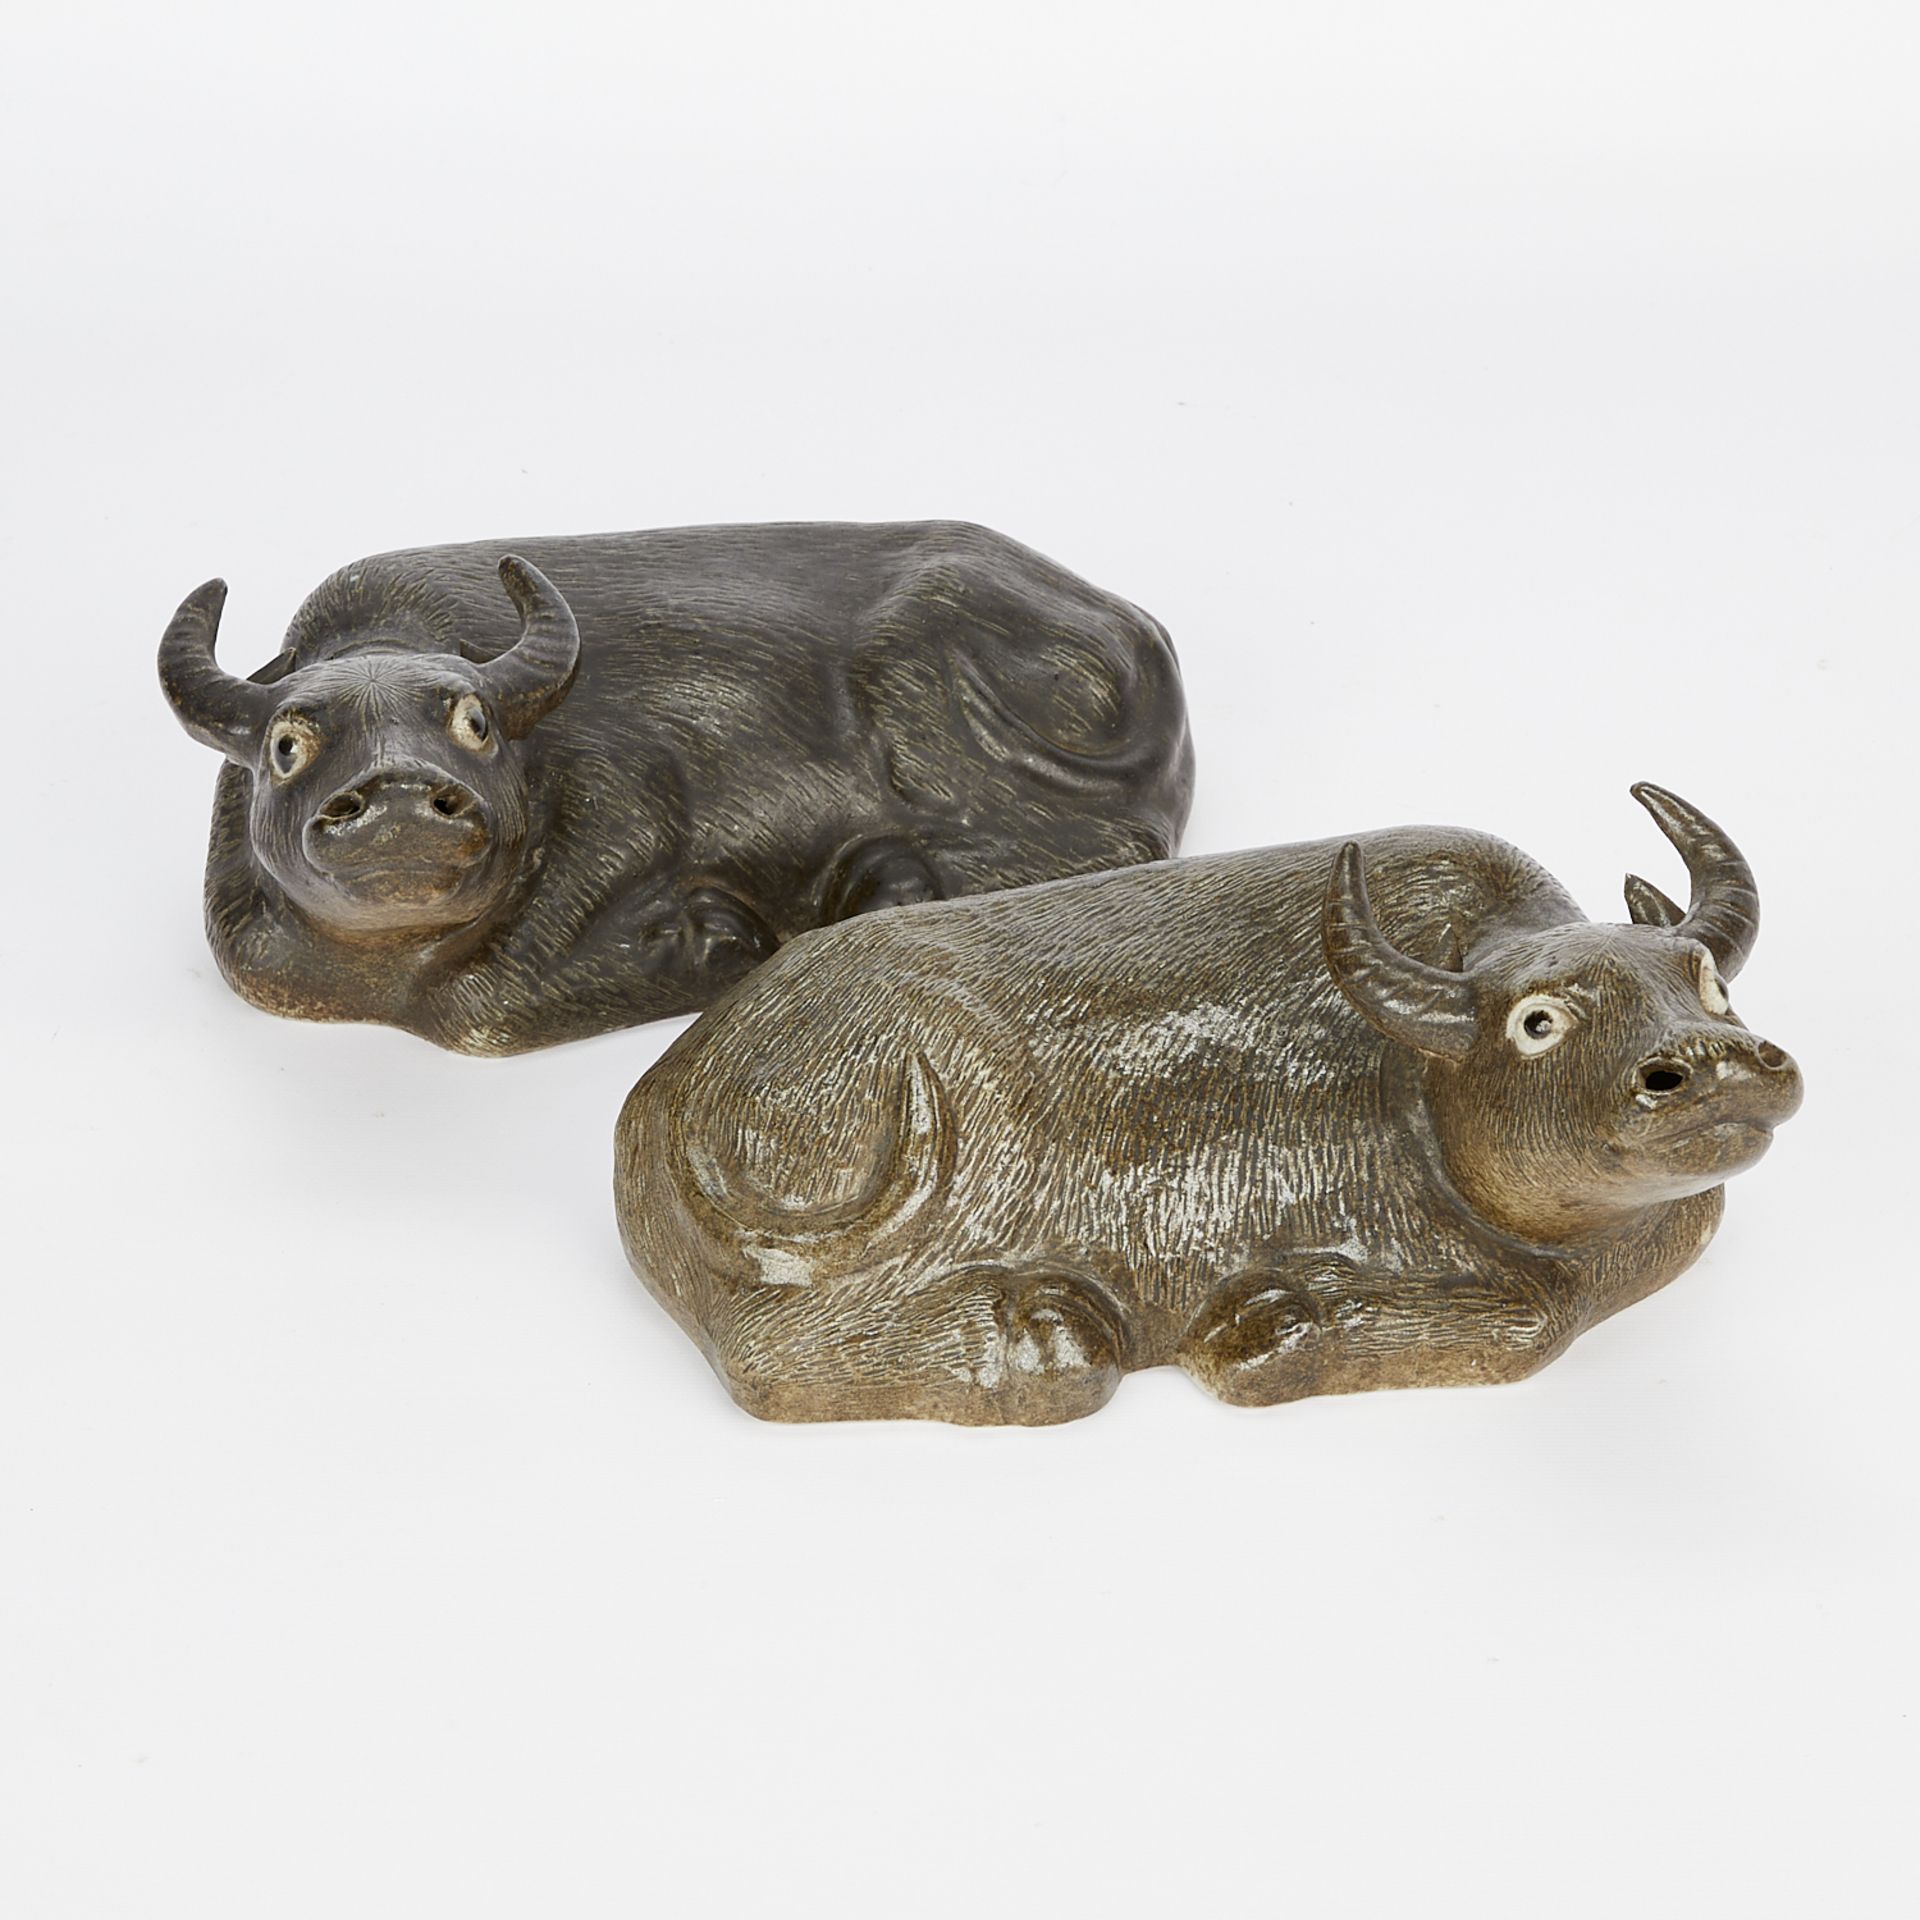 Pair of Antique Chinese Ceramic Water Buffalos - Image 7 of 13